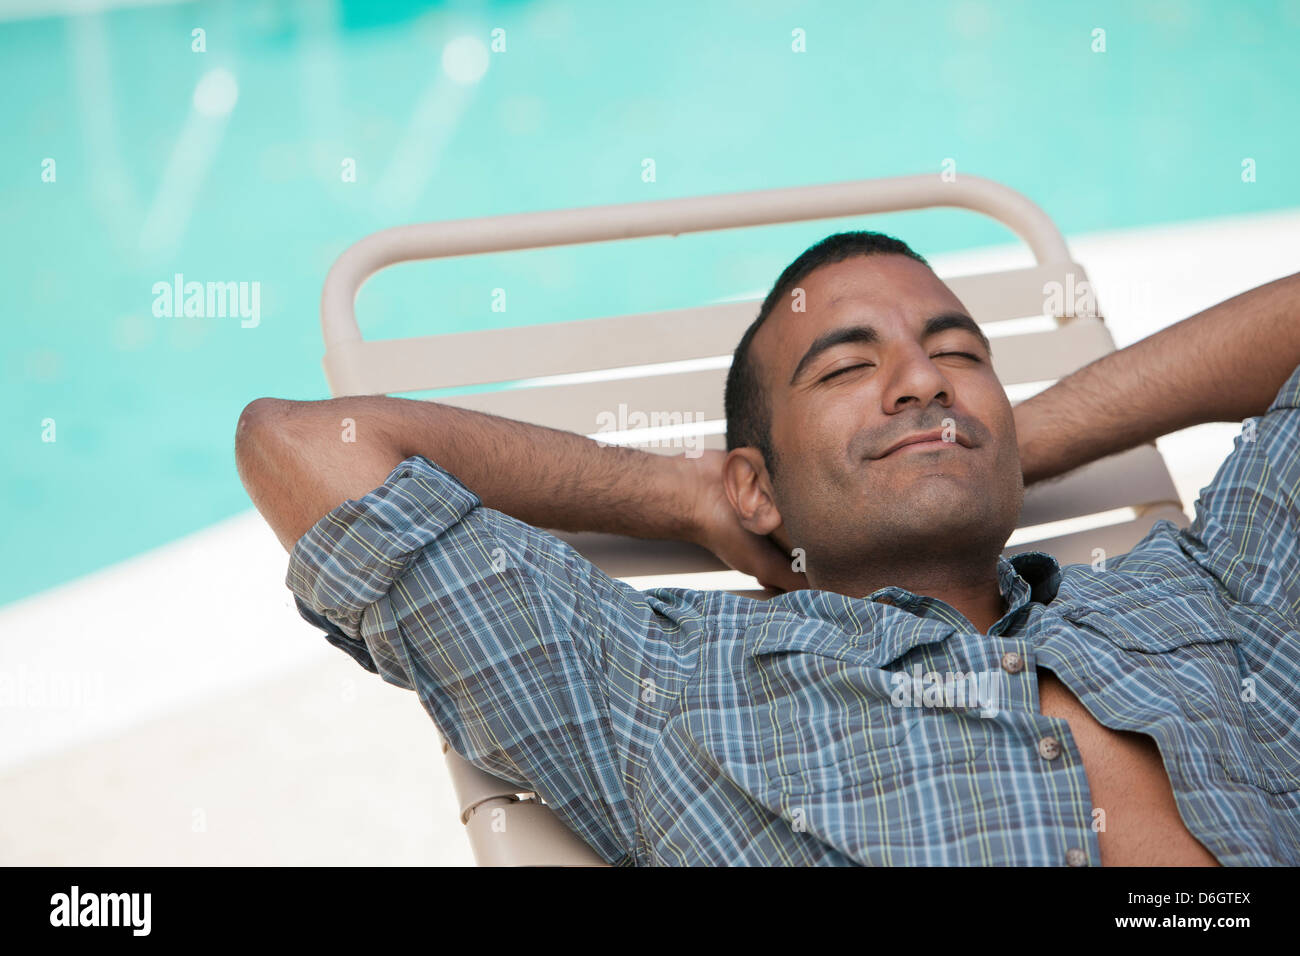 Man relaxing in lawn chair by pool Stock Photo